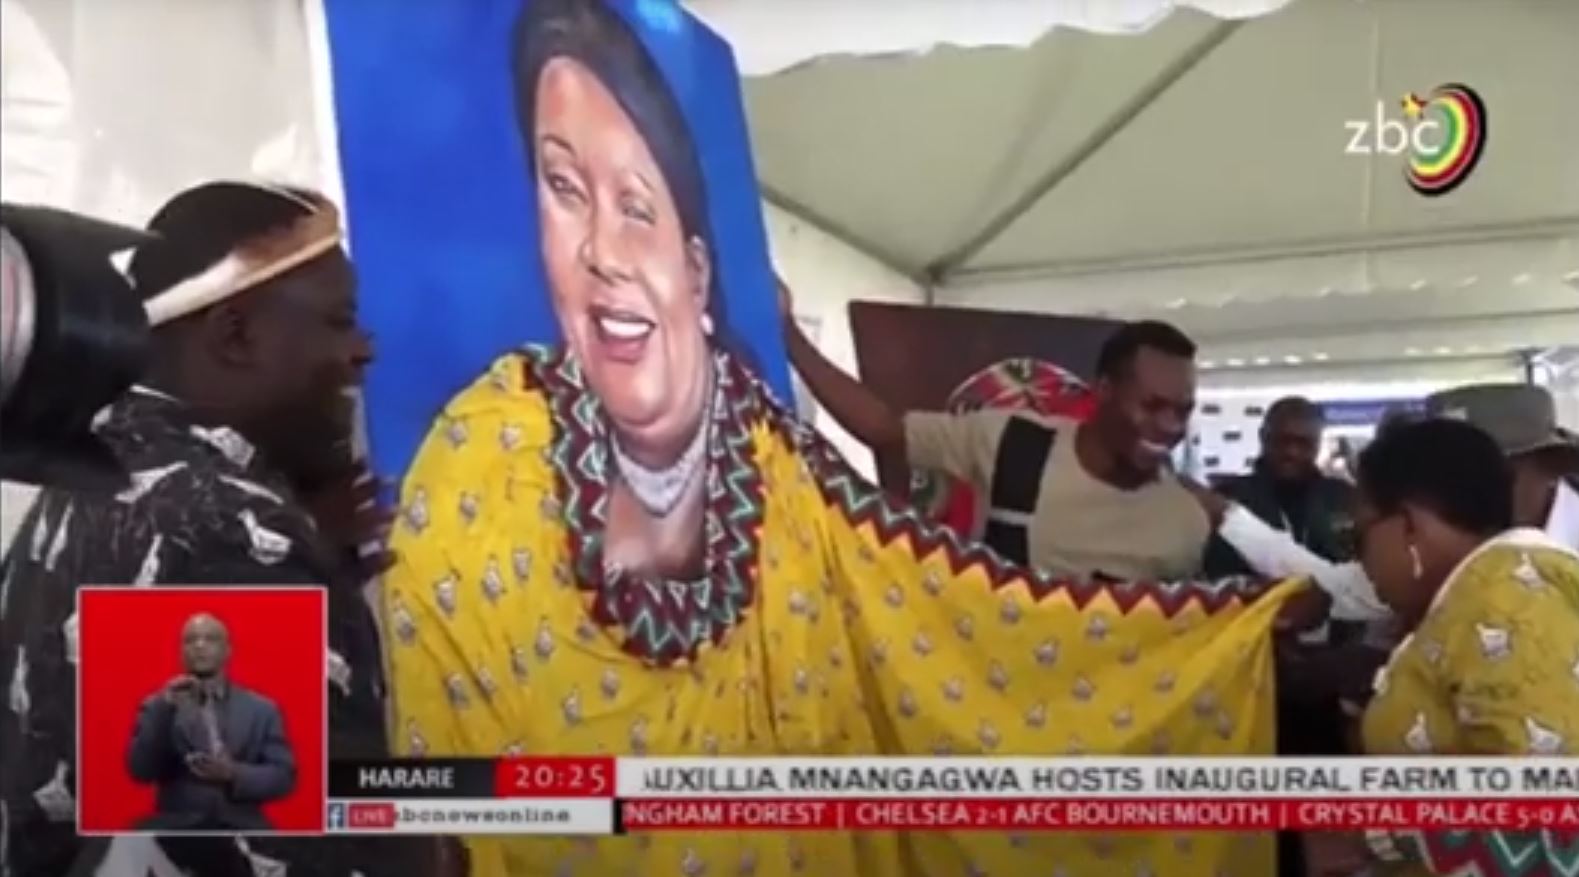 ZBC airs Keith's painting of the First Lady